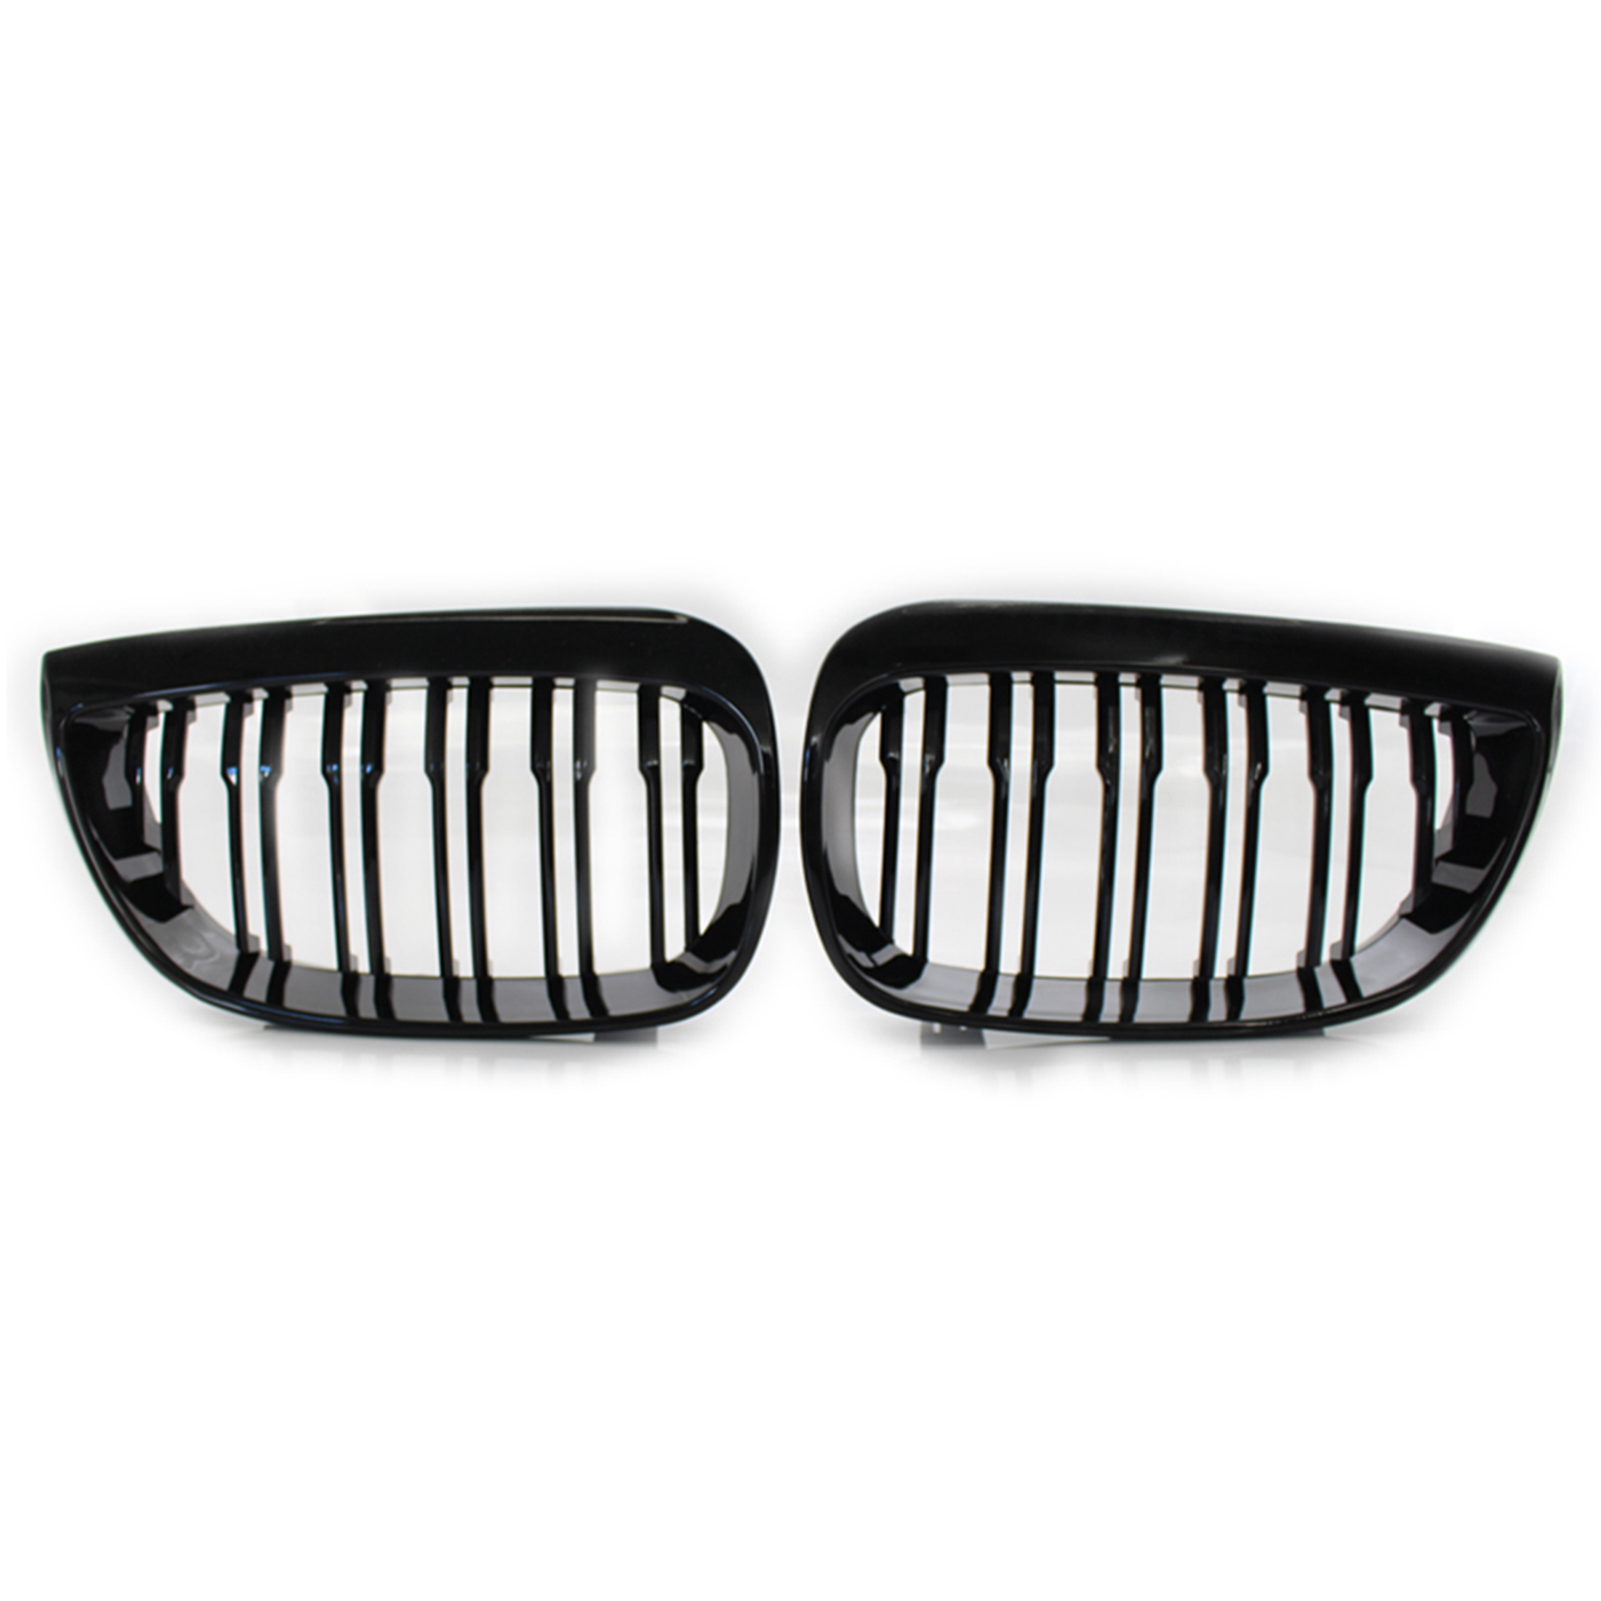 Andoer Pair Front Grille Grills Replacement for 1 Series E81 E87 2004-2007 Car Styling Racing Grills - image 1 of 7